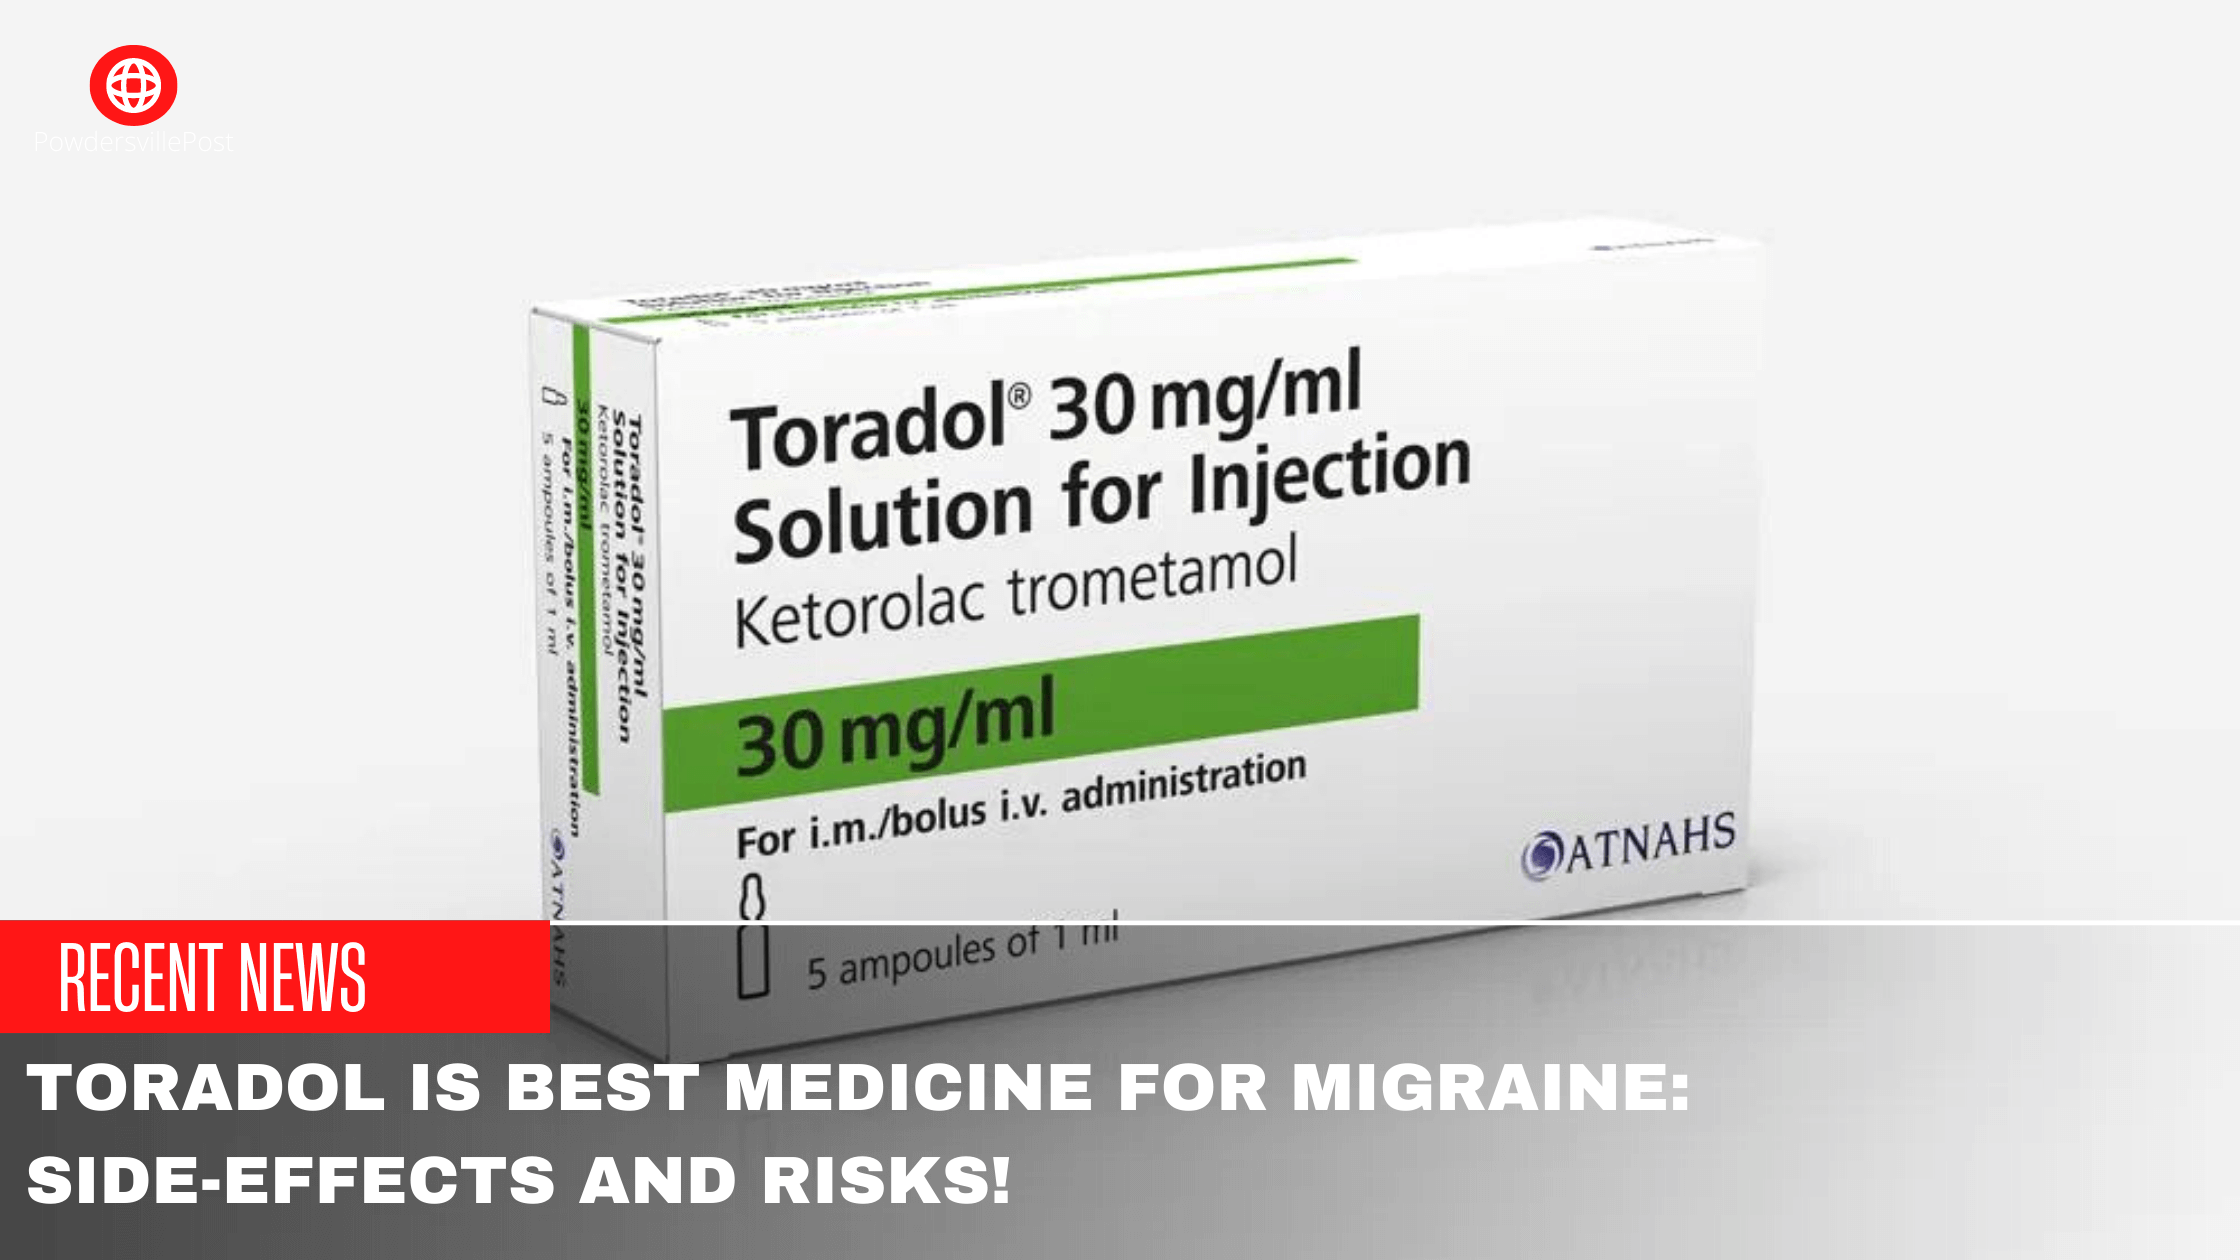 Toradol Is Best Medicine For Migraine Side-Effects And Risks